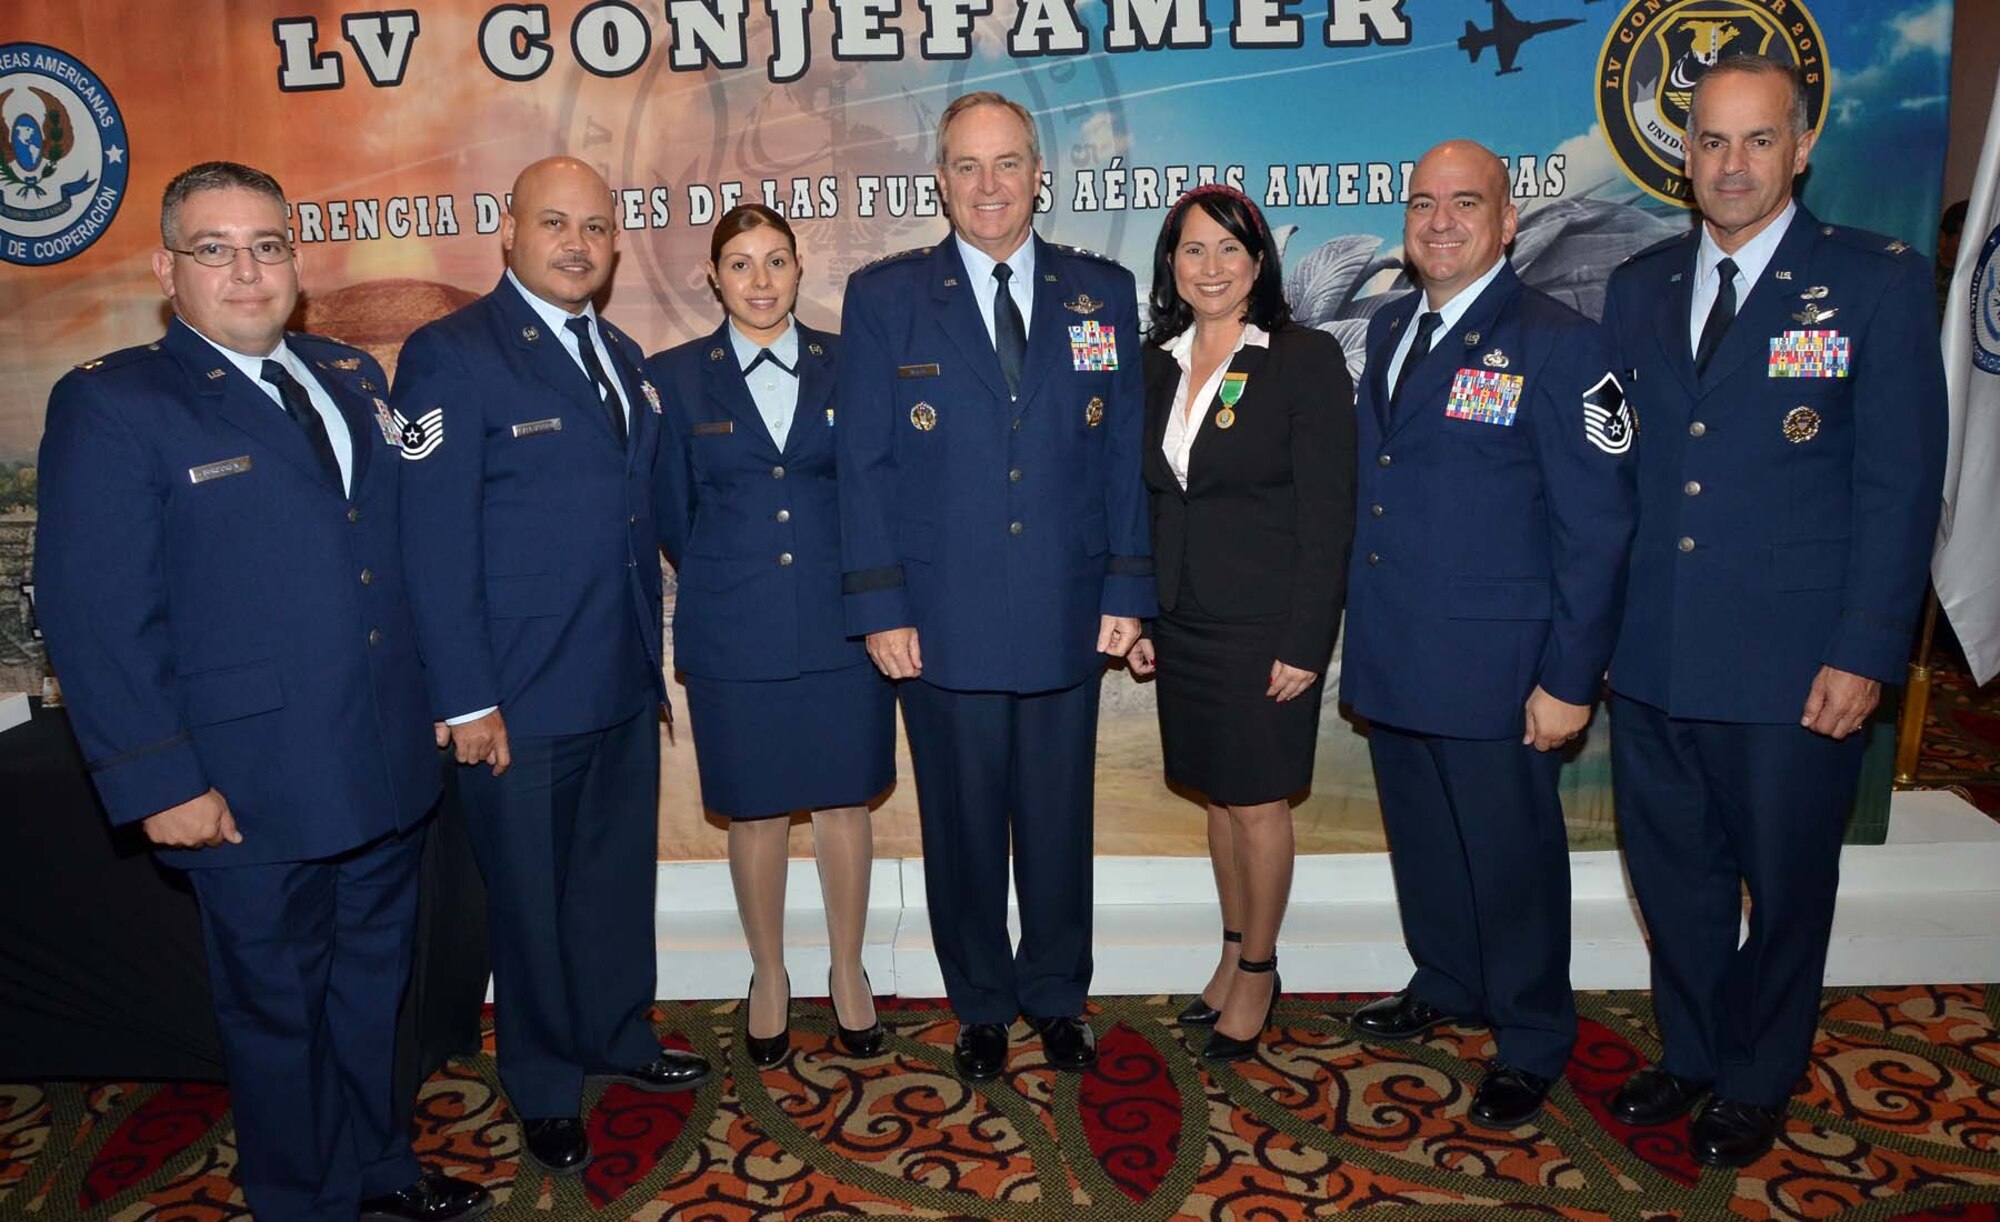 Air Force Chief of Staff Gen. Mark A. Welsh III, stands with Airmen from the System of Cooperation Among the American Air Forces at the group's annual Conference of American Air Chiefs in Mexico City, June 25, 2015. SICOFAA is a collection of more than 20 air forces from throughout the Western Hemisphere who work together to enhance interoperability and relationships across the region. (U.S. Air Force photo by Capt. Bryan Bouchard)